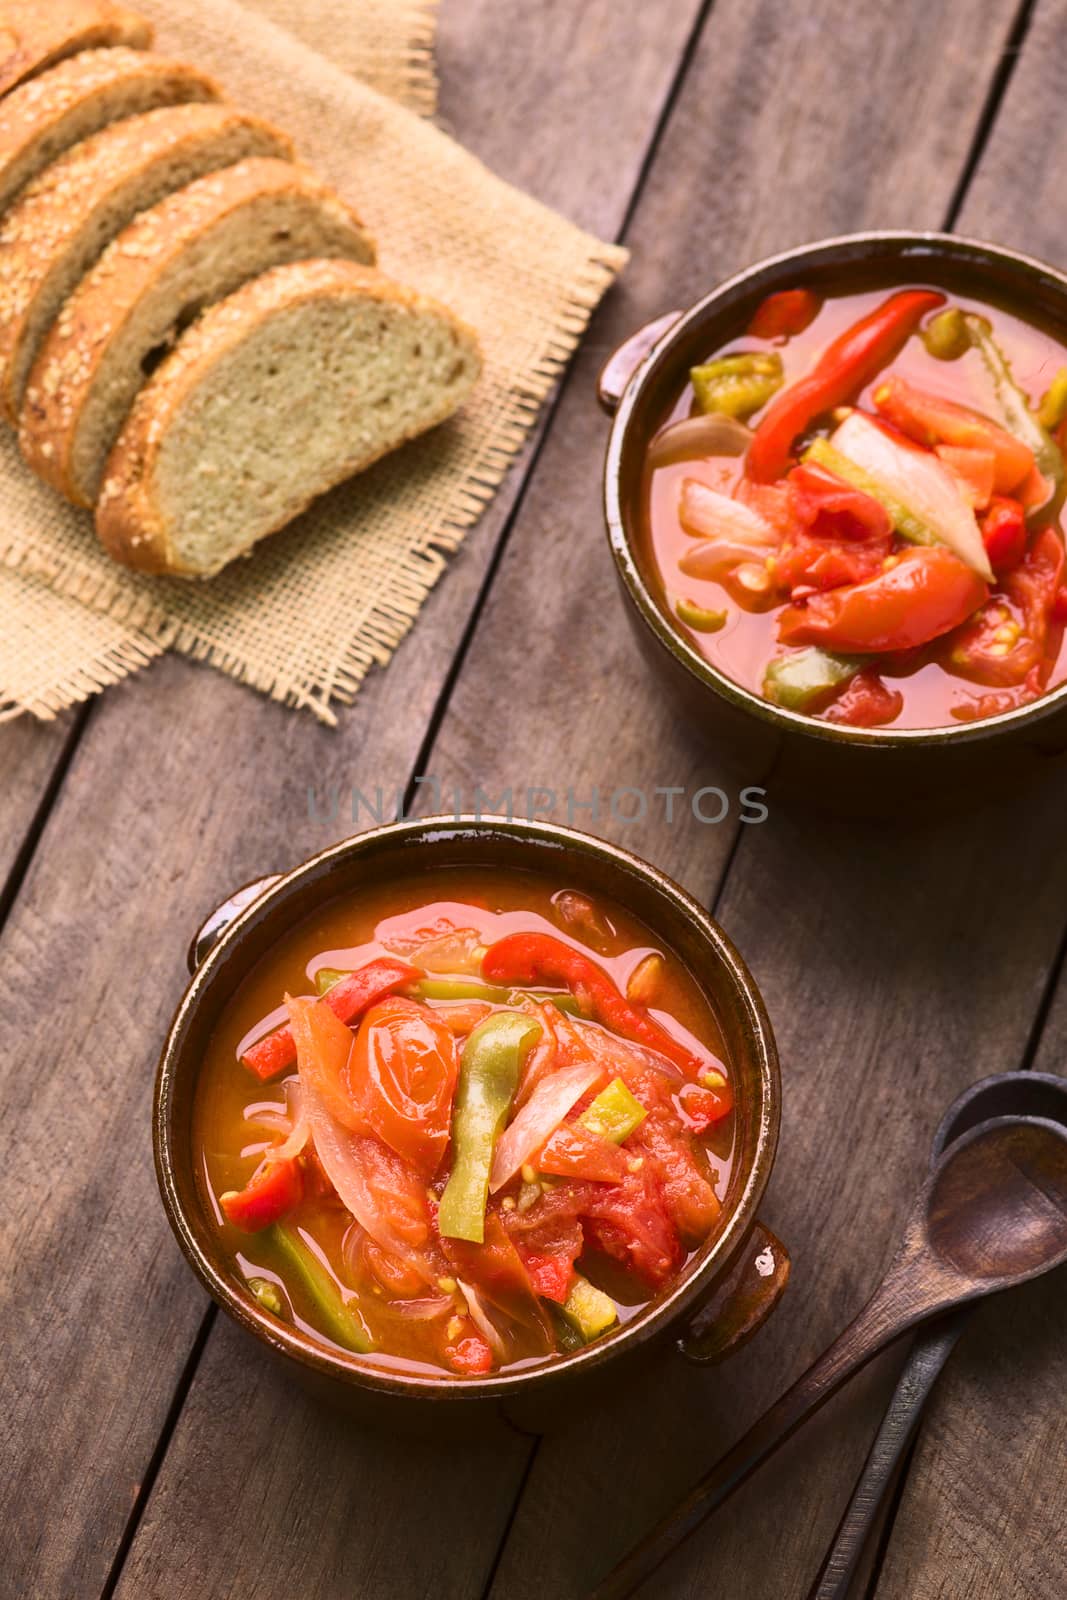 Two bowls of Hungarian traditional dish called Lecso, a vegetarian stew made of onion, pepper and tomato, seasoned with salt and pepper. It can be accompanied by bread or rice (Selective Focus, Focus in the middle of the first dish)  